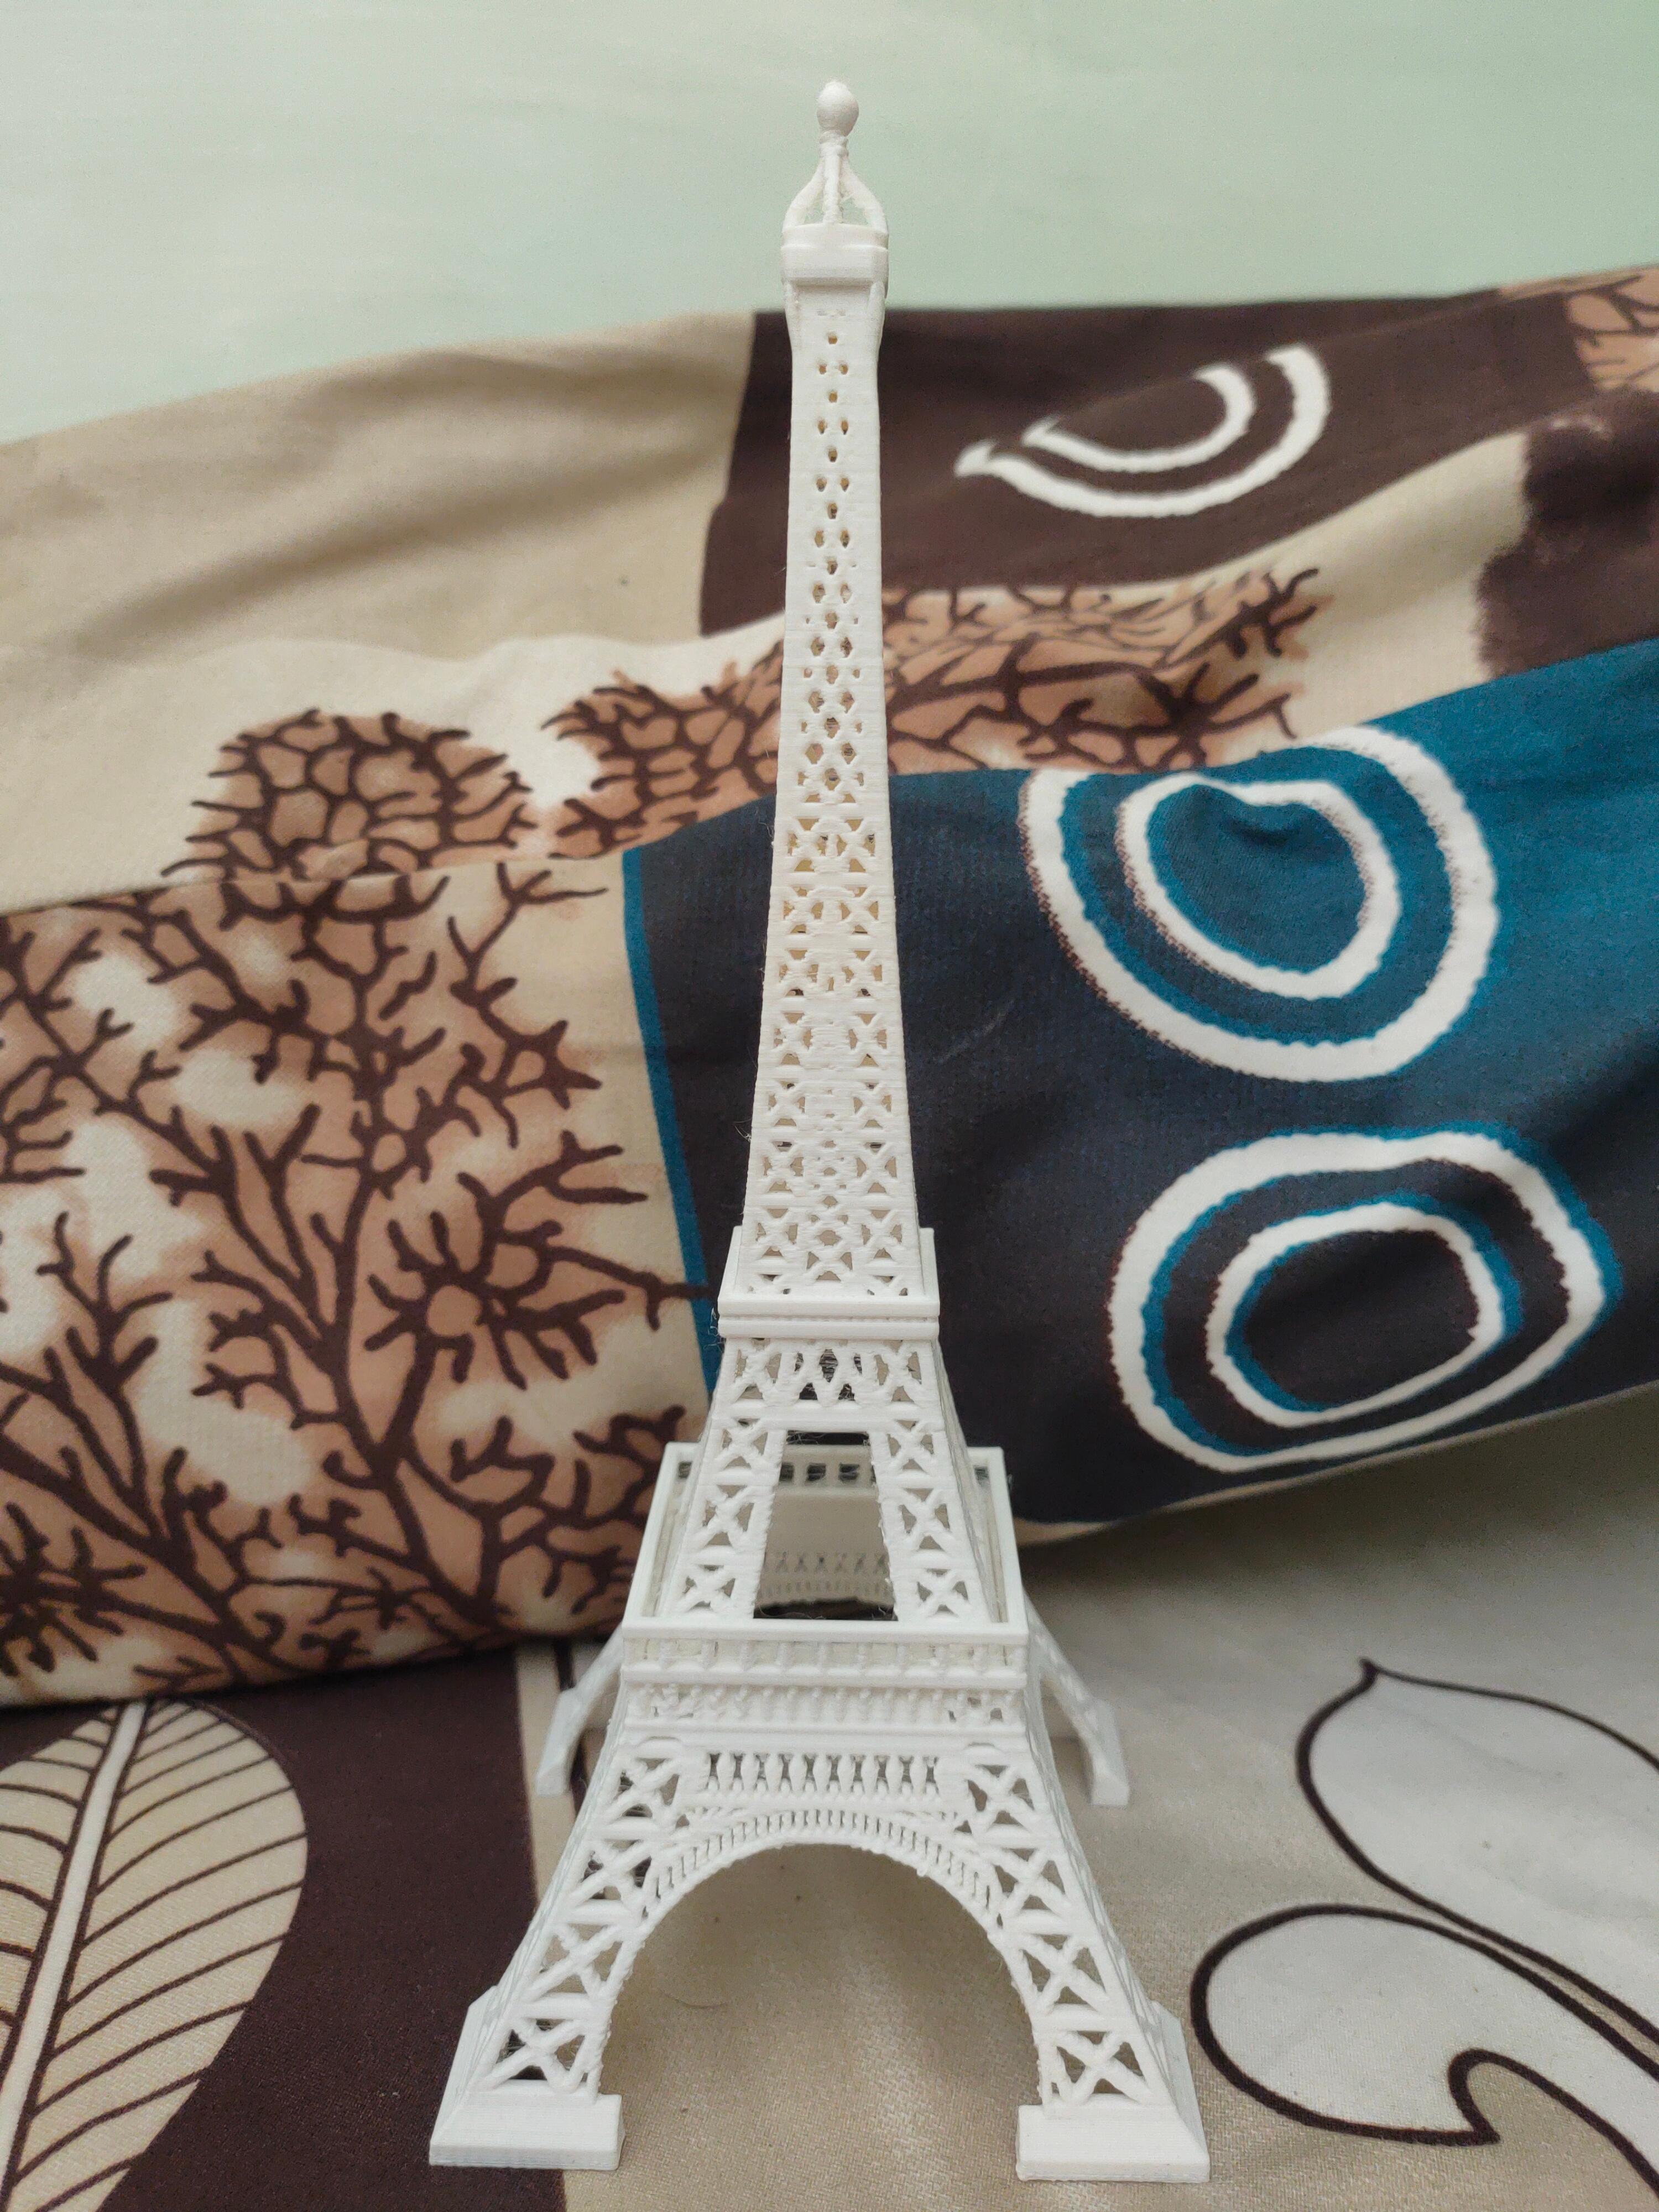 Eiffel Tower support free 3D Printable - Great, Thank you for this 
I printed this in my Ender printer  - 3d model